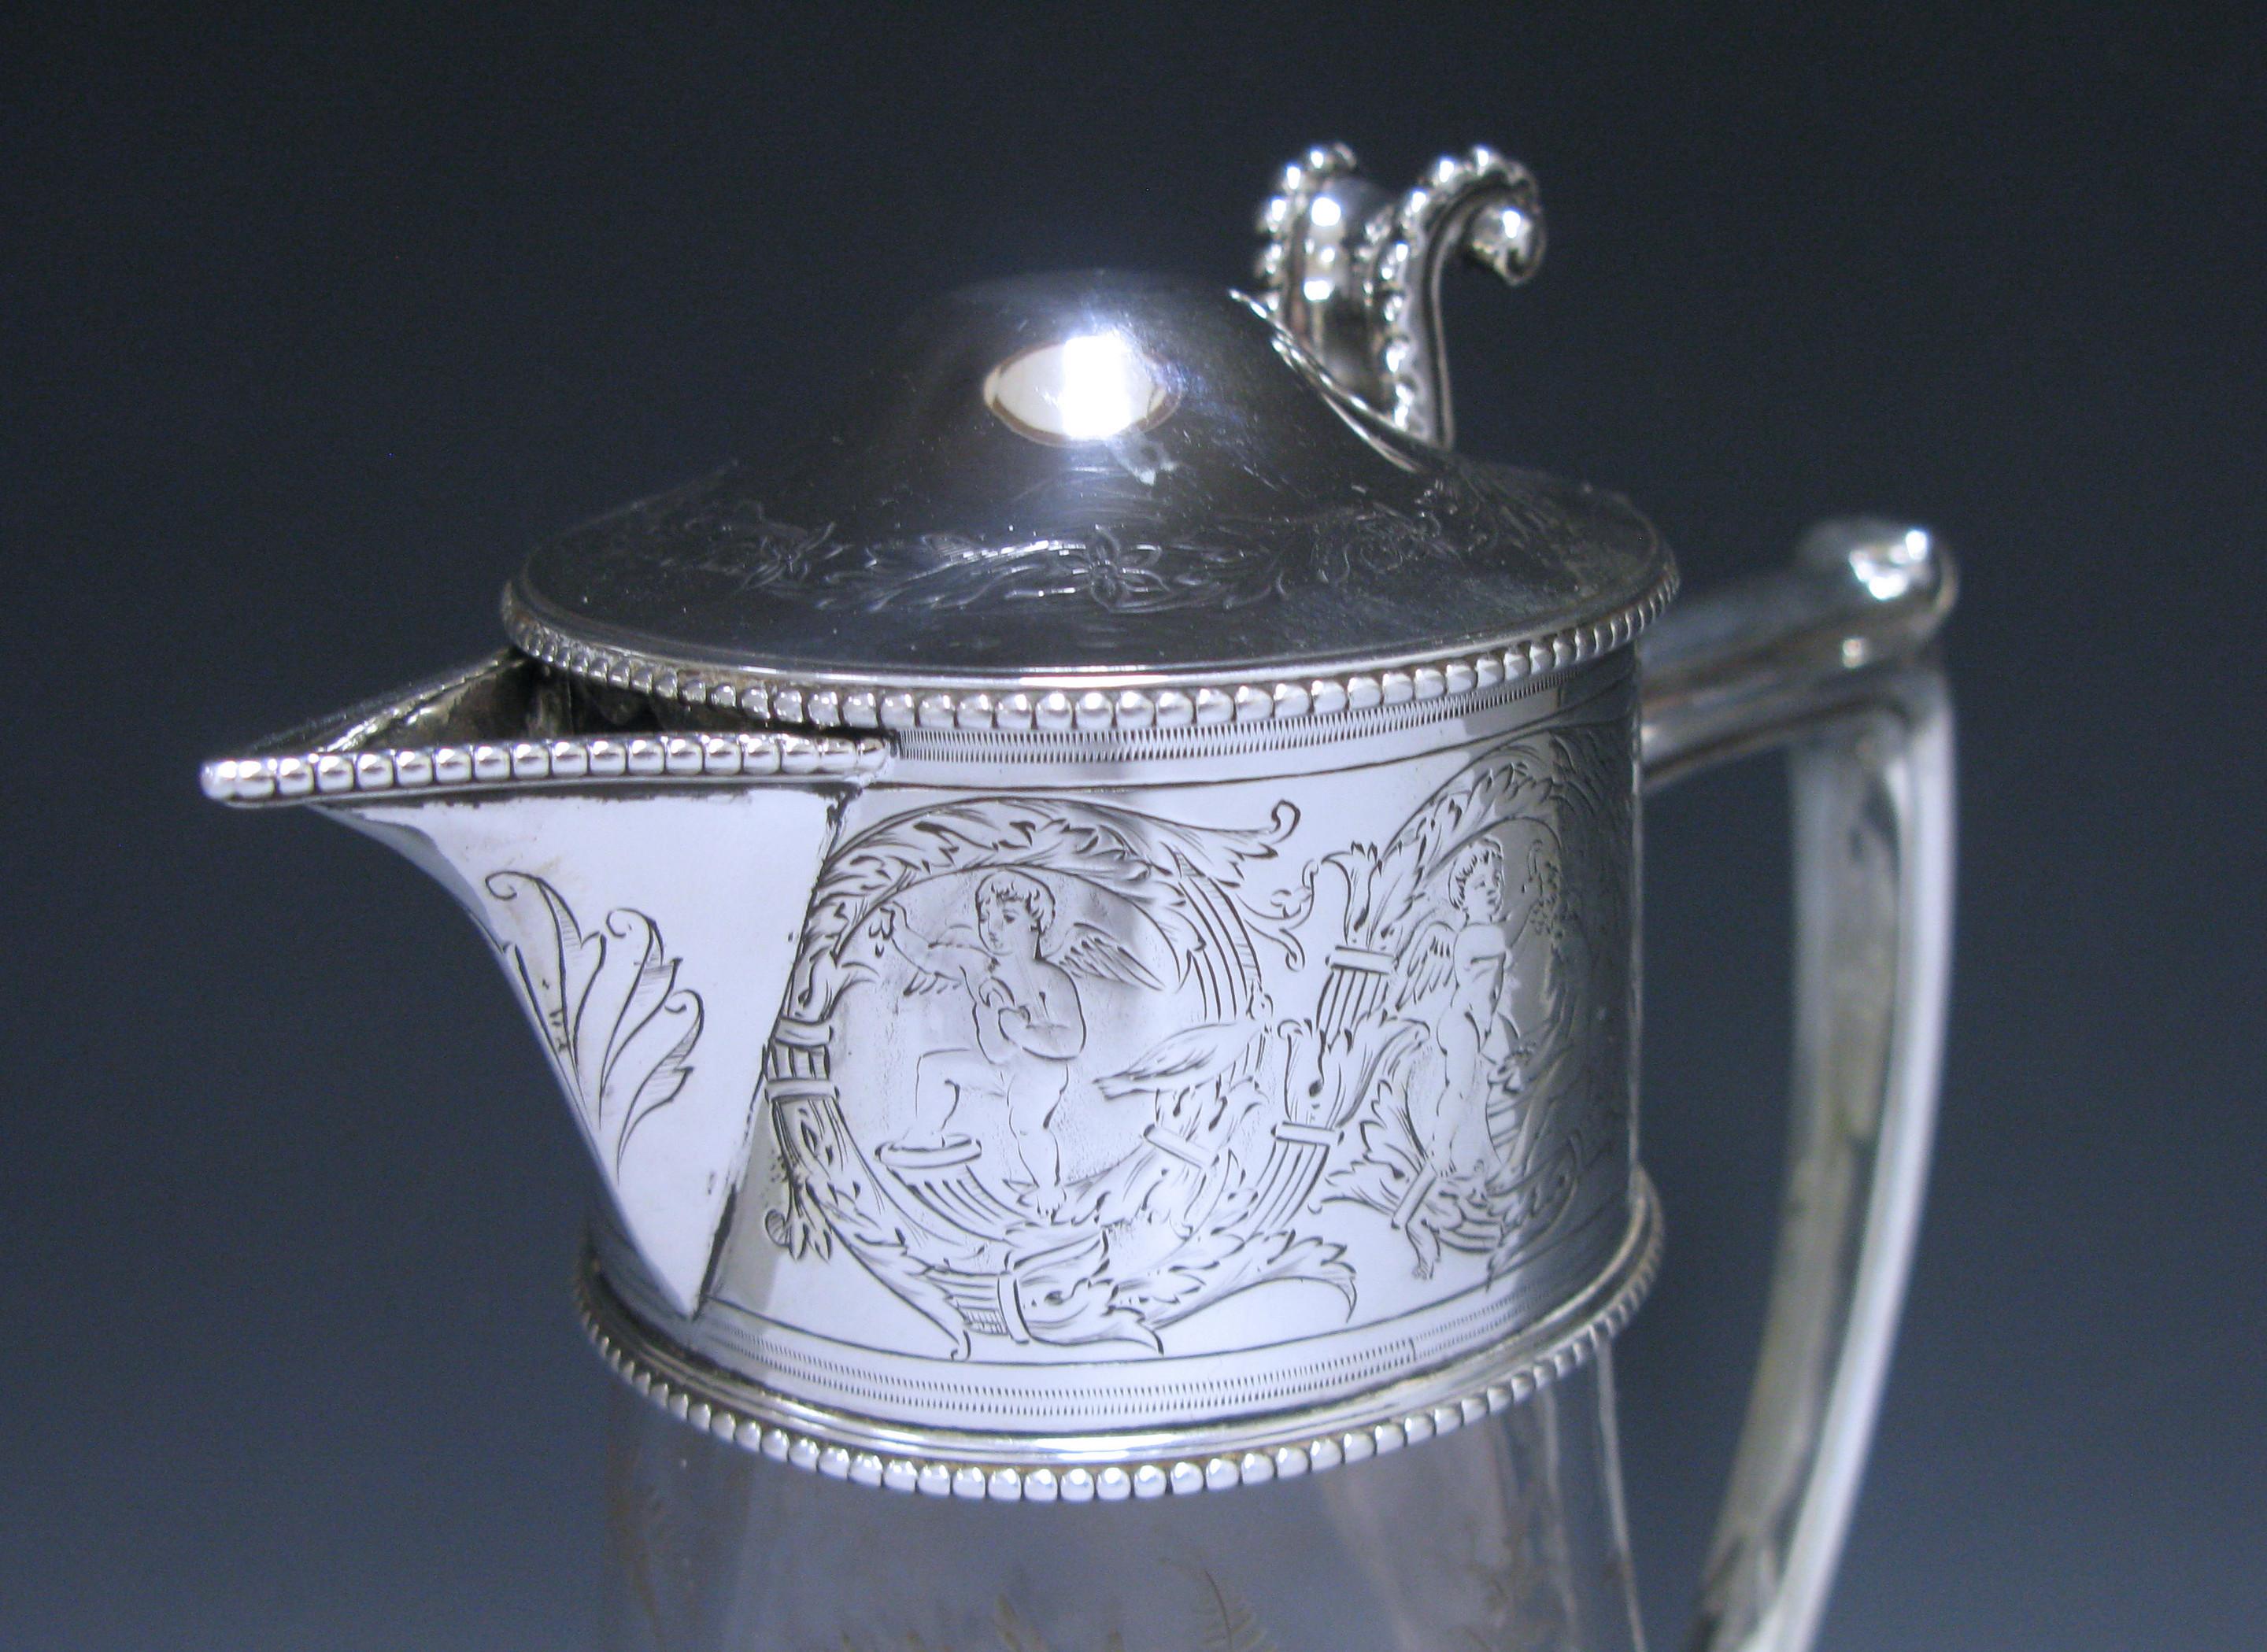 A splendid Victorian silver mounted Claret Jug. The hinged mount is engraved with cherubs on one side and on the other is central plain cartouche joined by swags of leaves and flowers. The domed lid has a border of leaves. The beautiful glass body